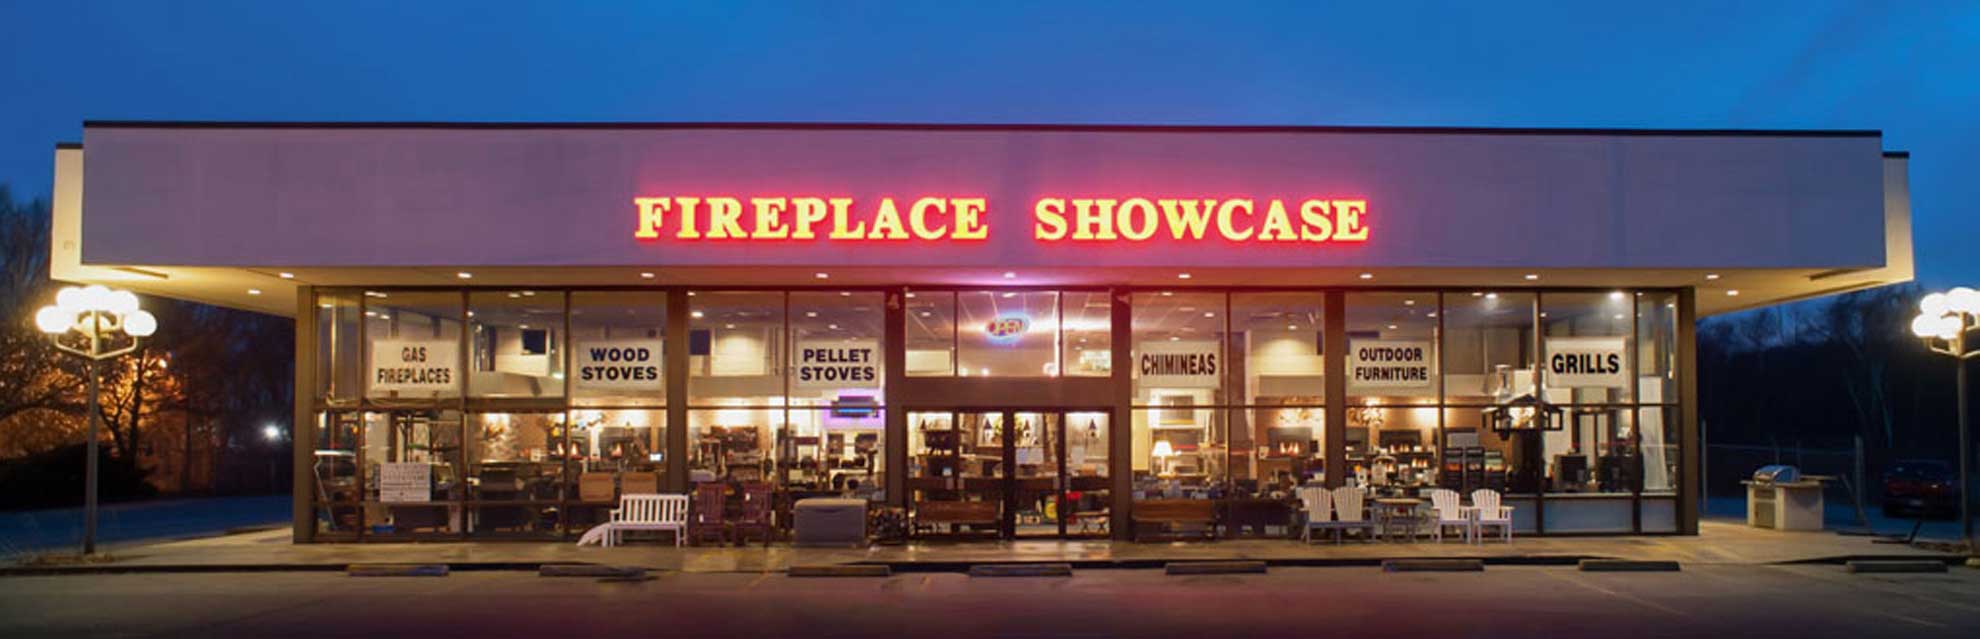 Electric Fireplaces Showroom Near Me | Electric Fireplace